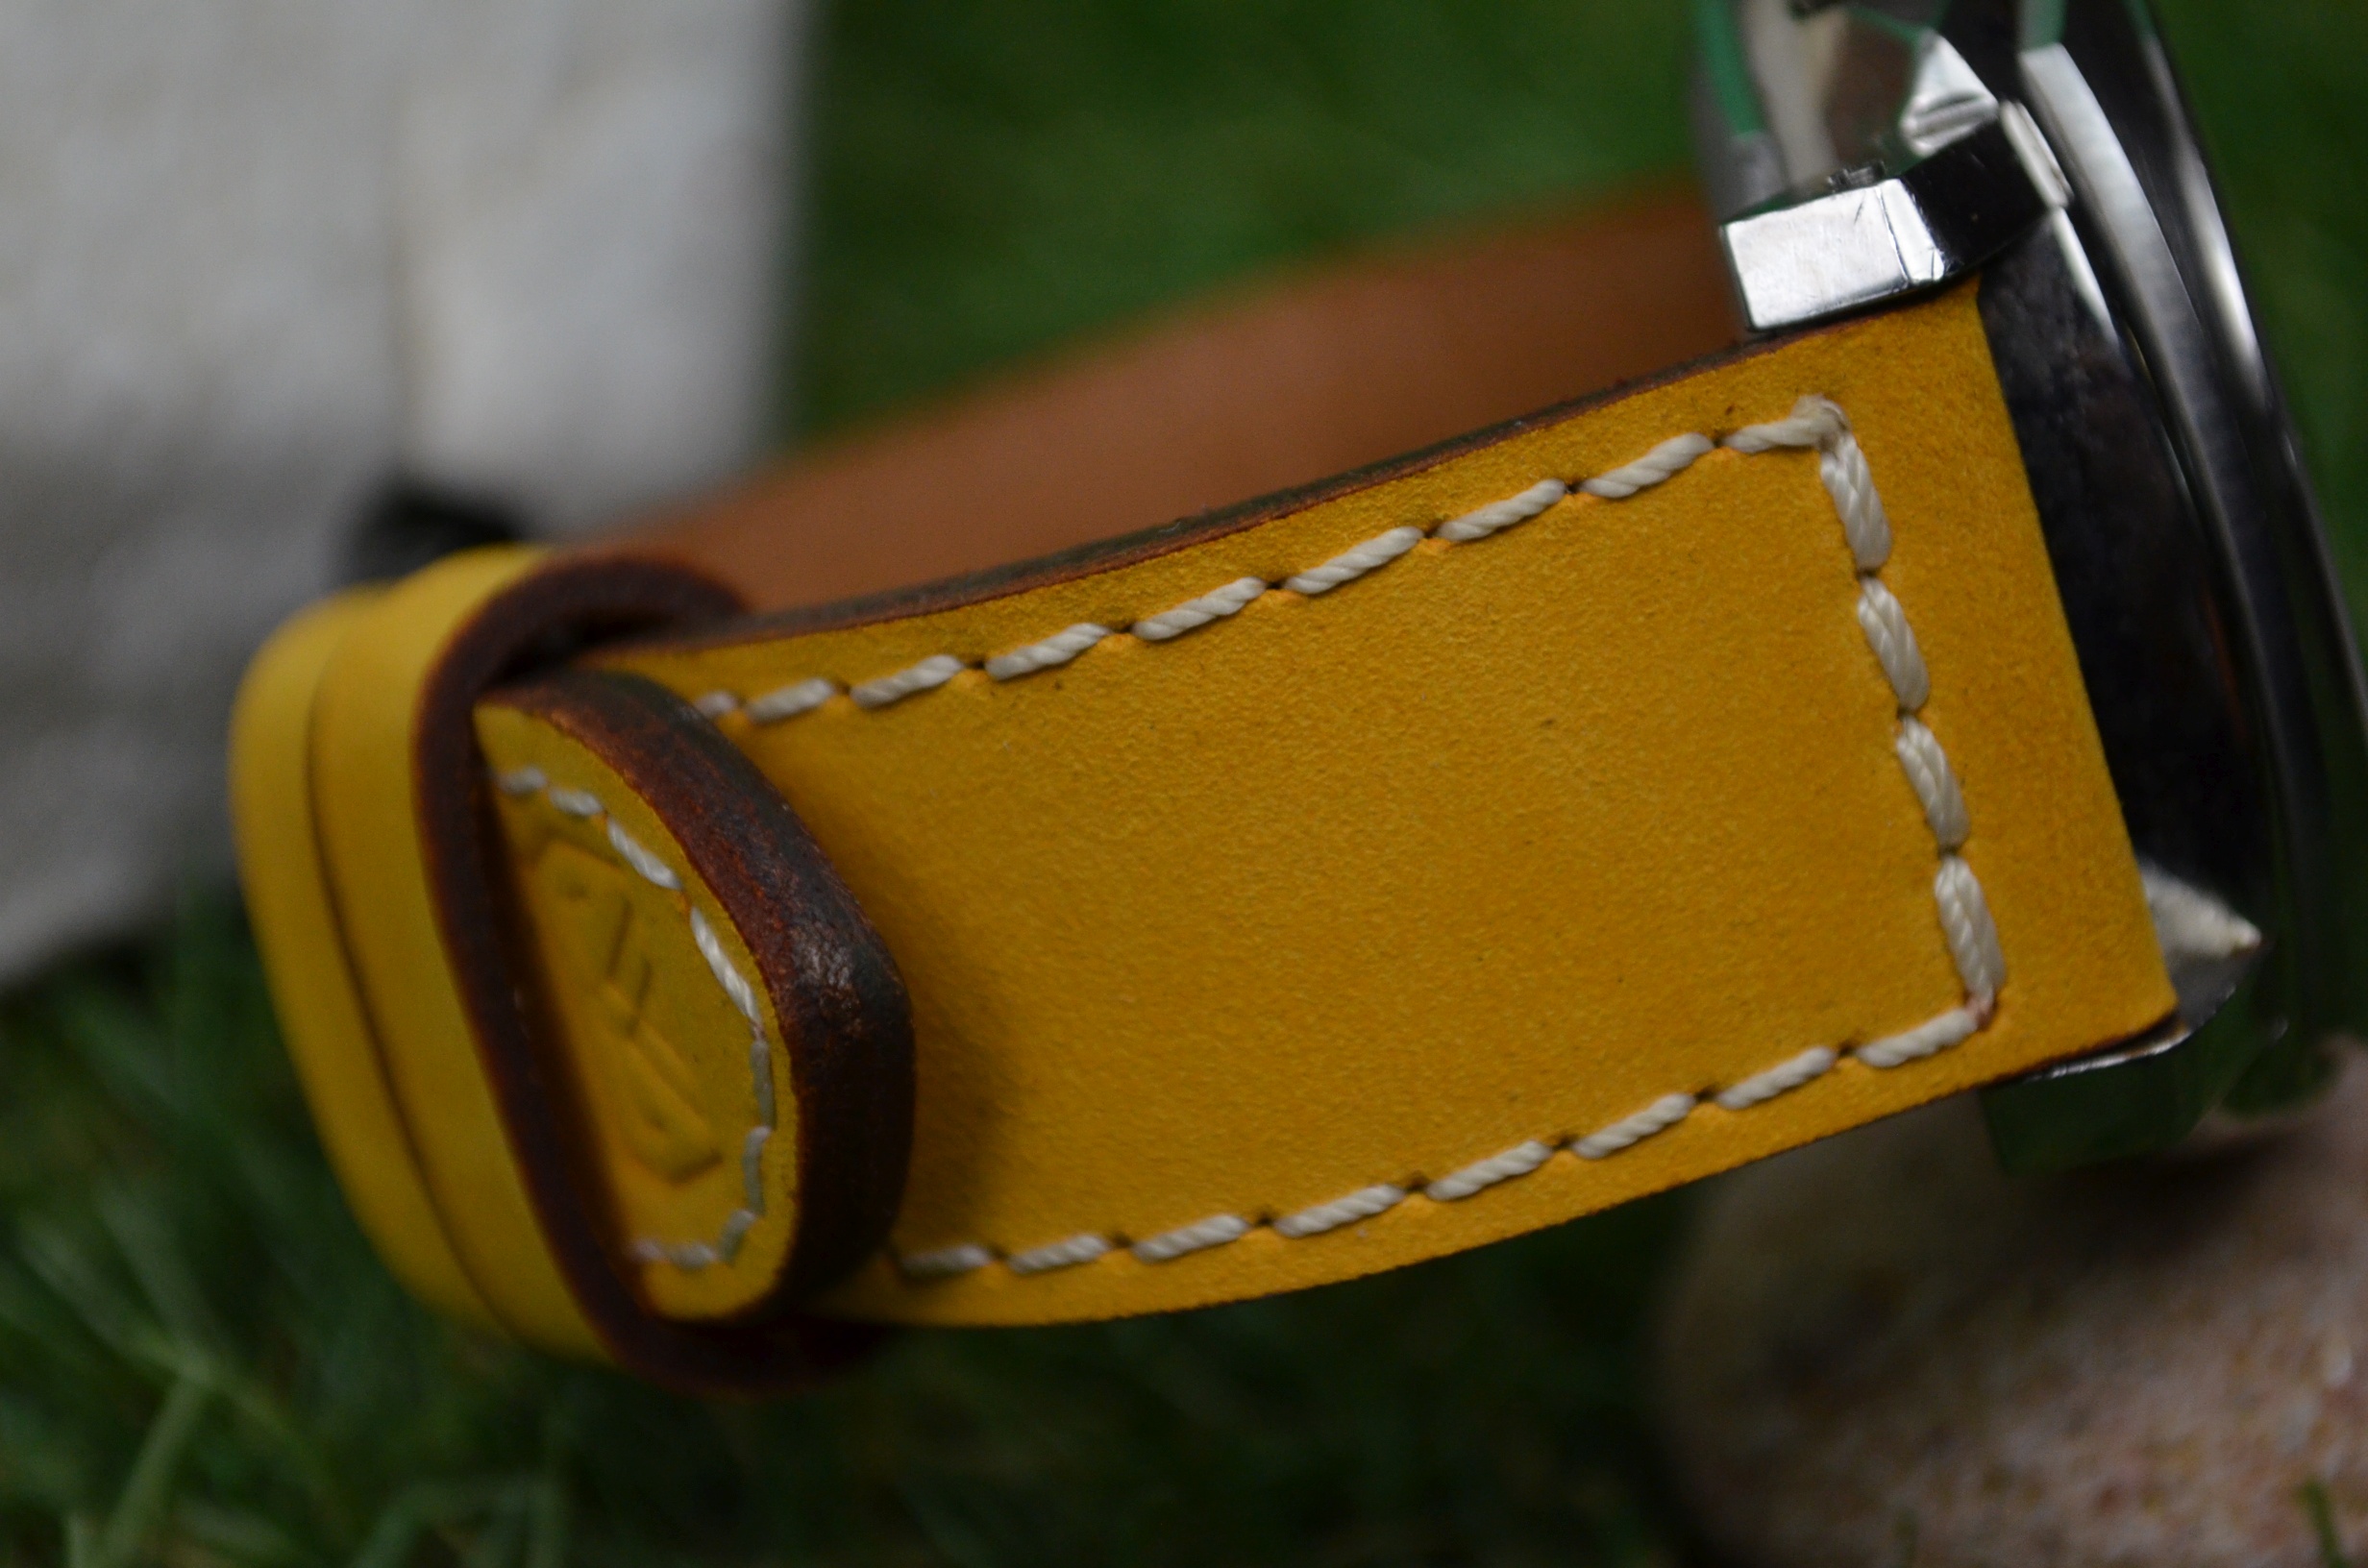 II YELLOW is one of our hand crafted watch straps. Available in yellow color, 3.5 - 4 mm thick.